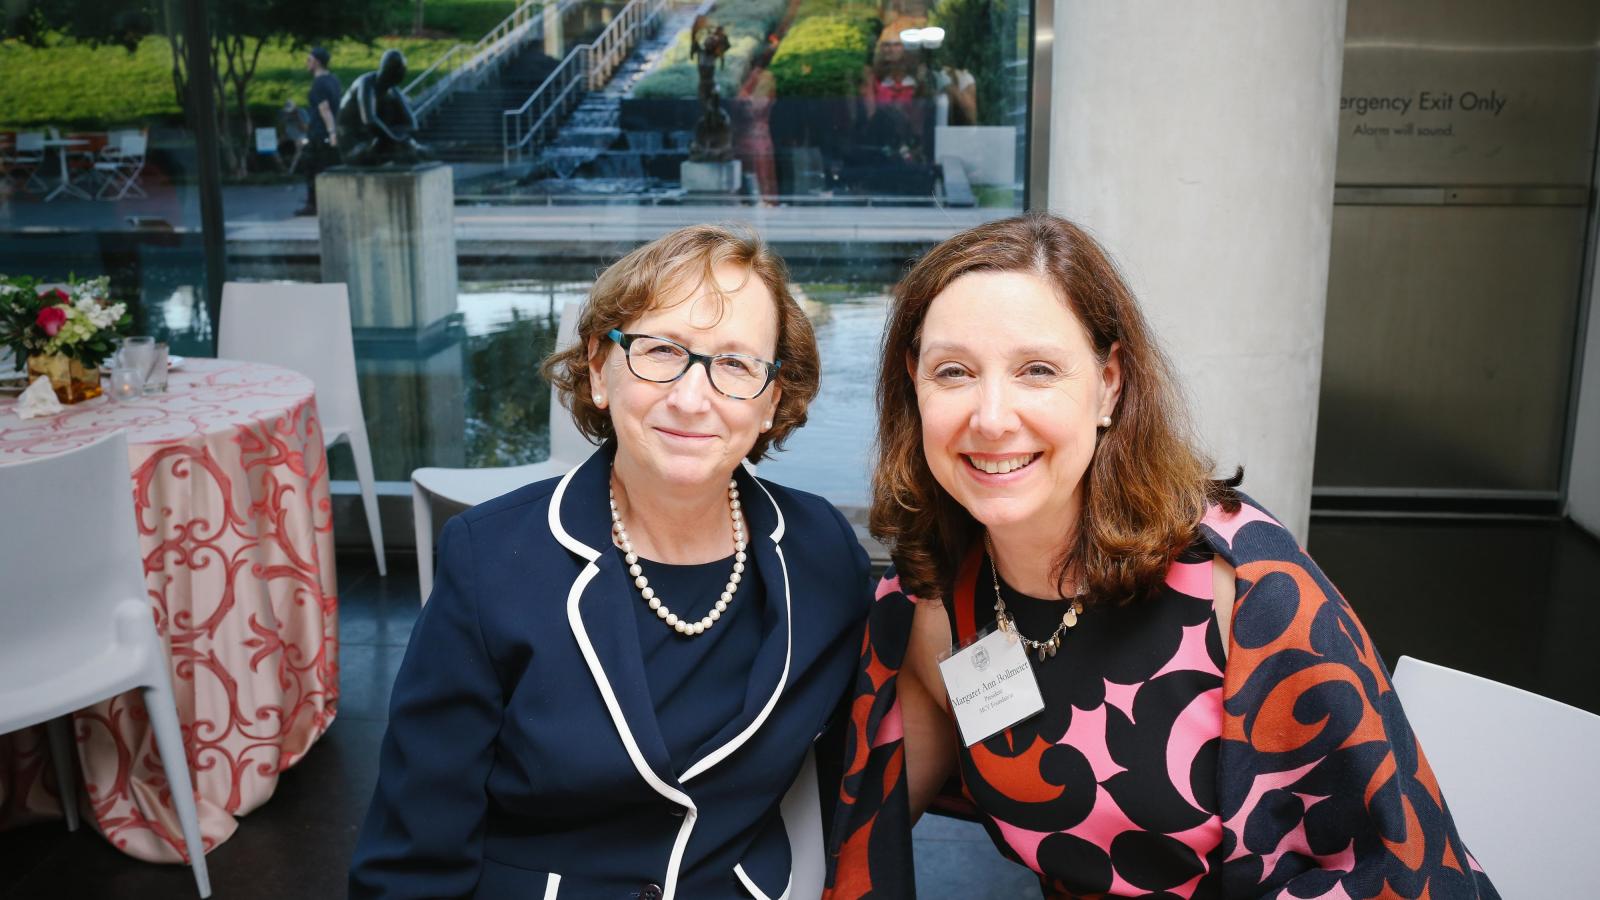 Marsha Rappley, M.D., former CEO of VCU Health System and senior vice president for health sciences at VCU, and Margaret Ann Bollmeier, president of the MCV Foundation, celebrate planned giving donors at the 2017 MCV Society reception. Photo: Brittany Daniel Studio